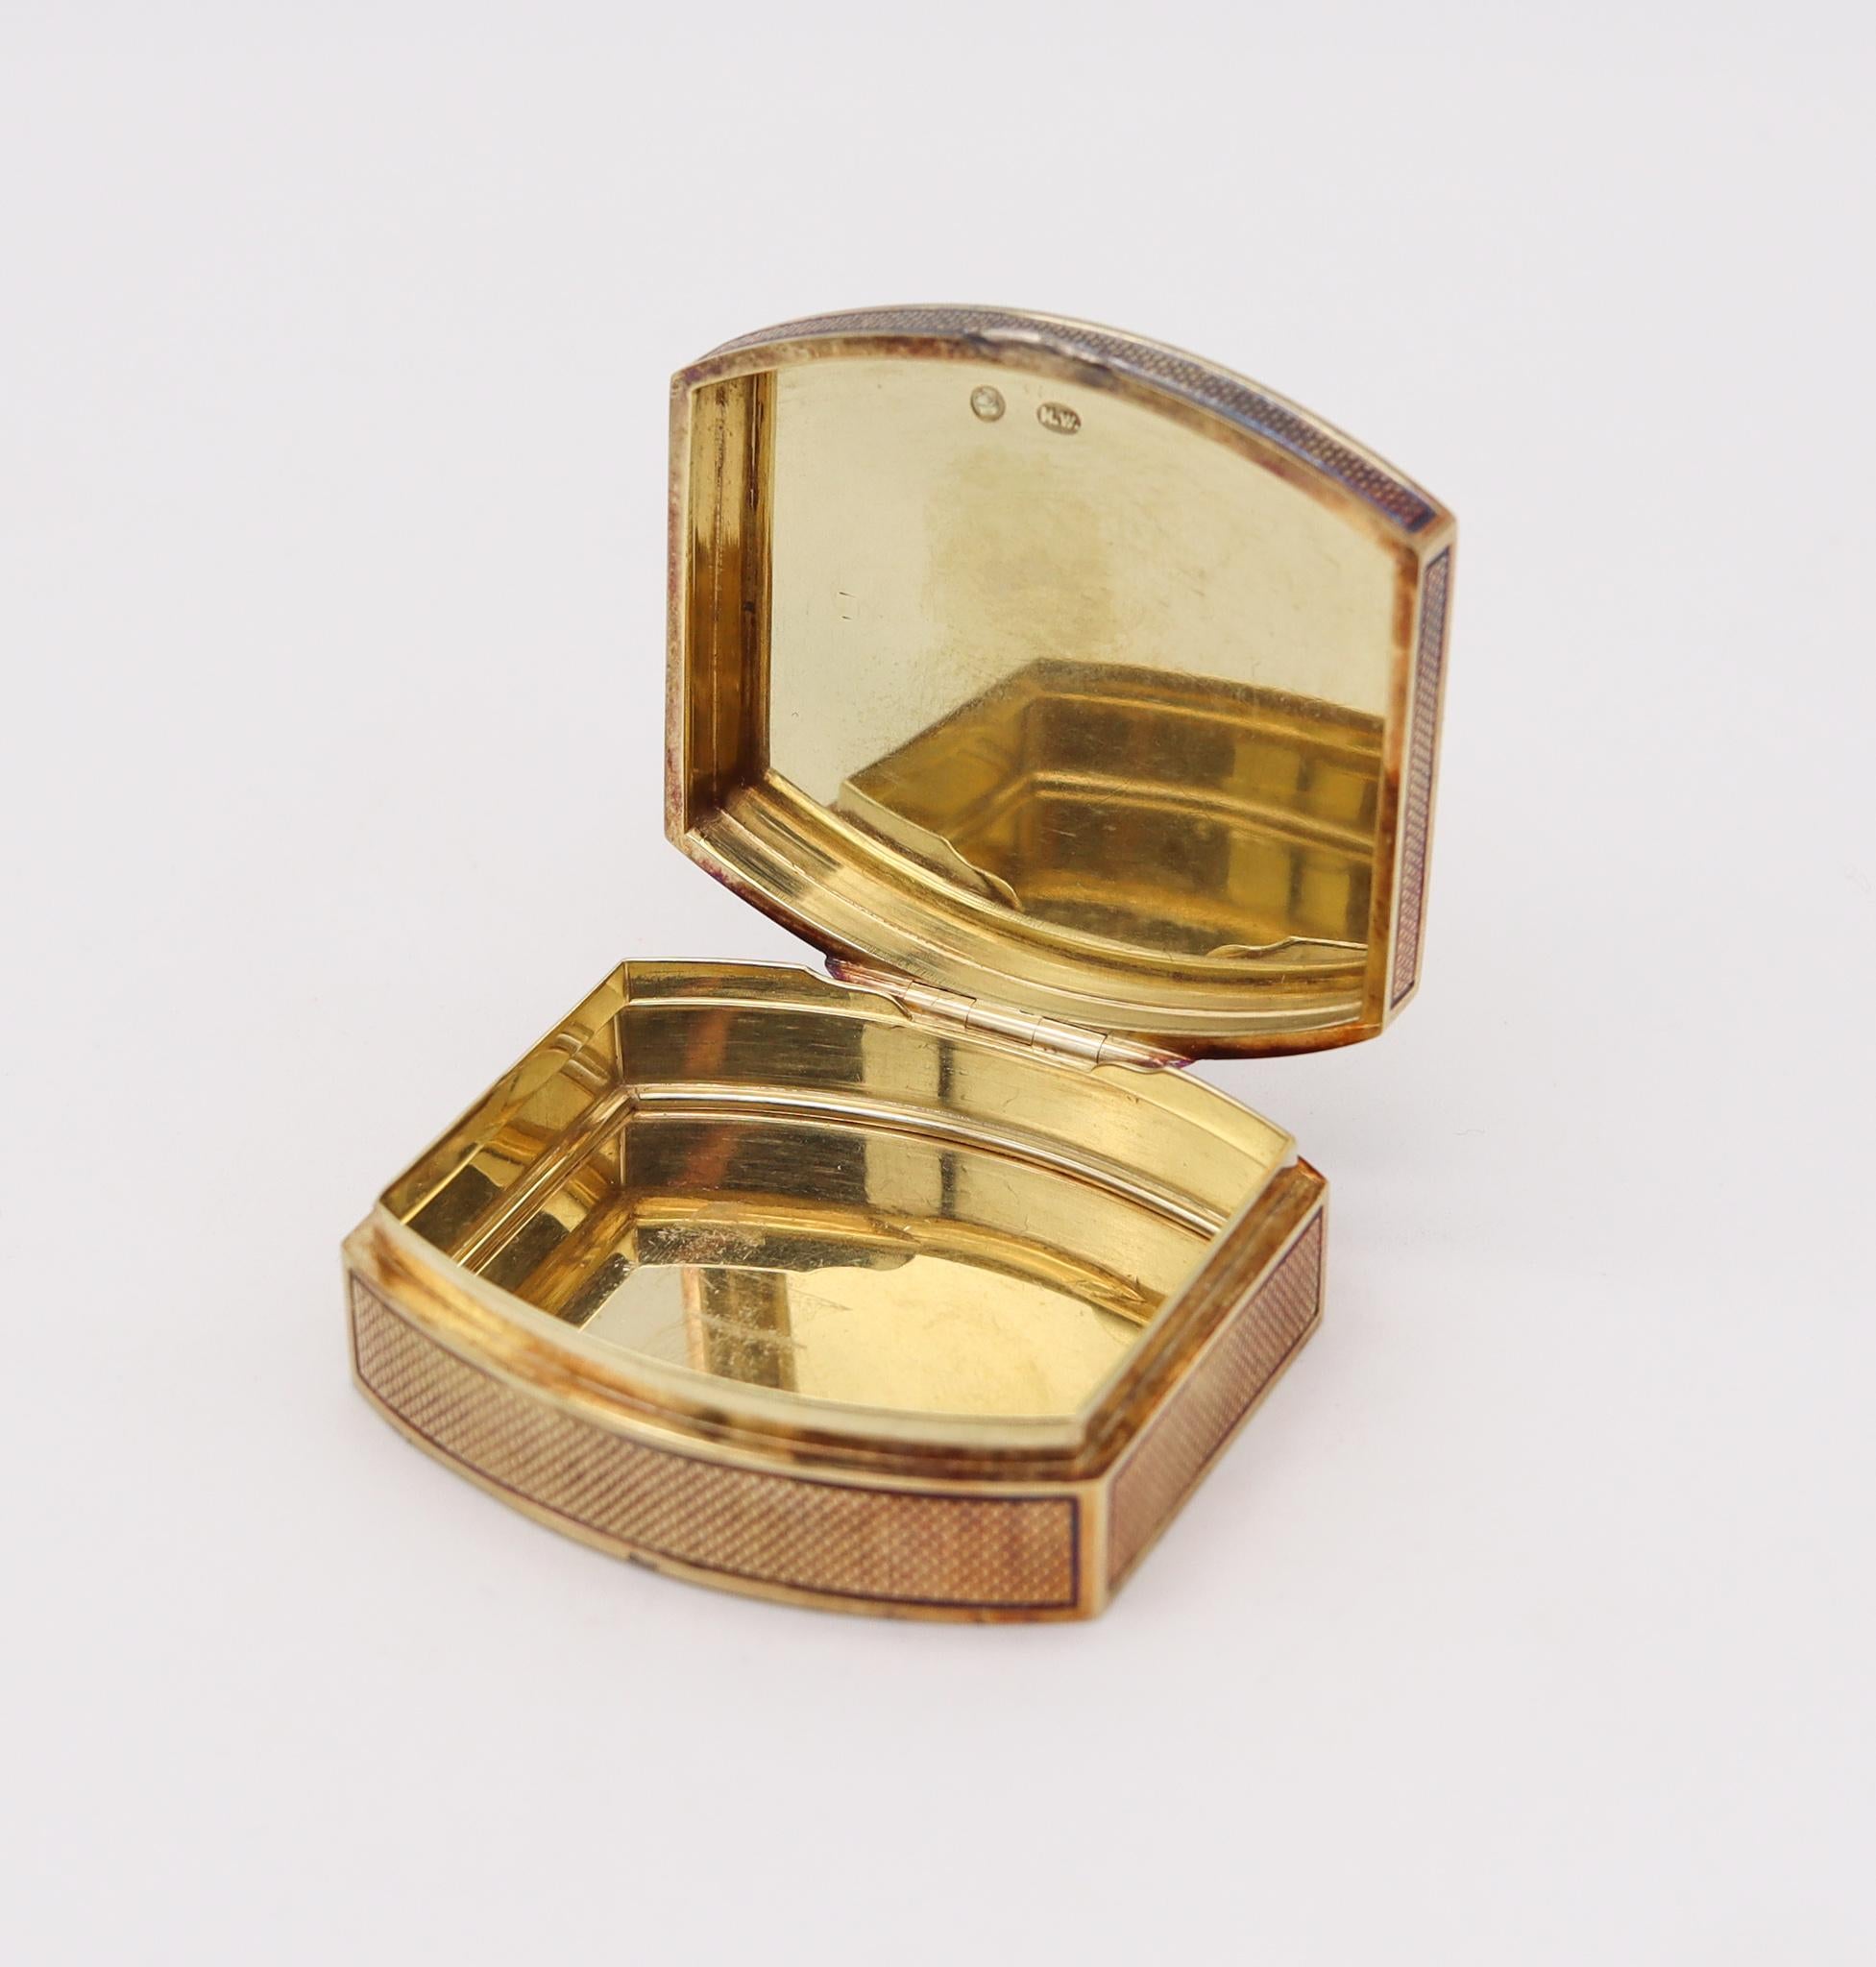 Neoclassical Henrik Wigström Russia 1908 St Petersburg Enameled Snuff Pill Box in 14Kt Gold For Sale